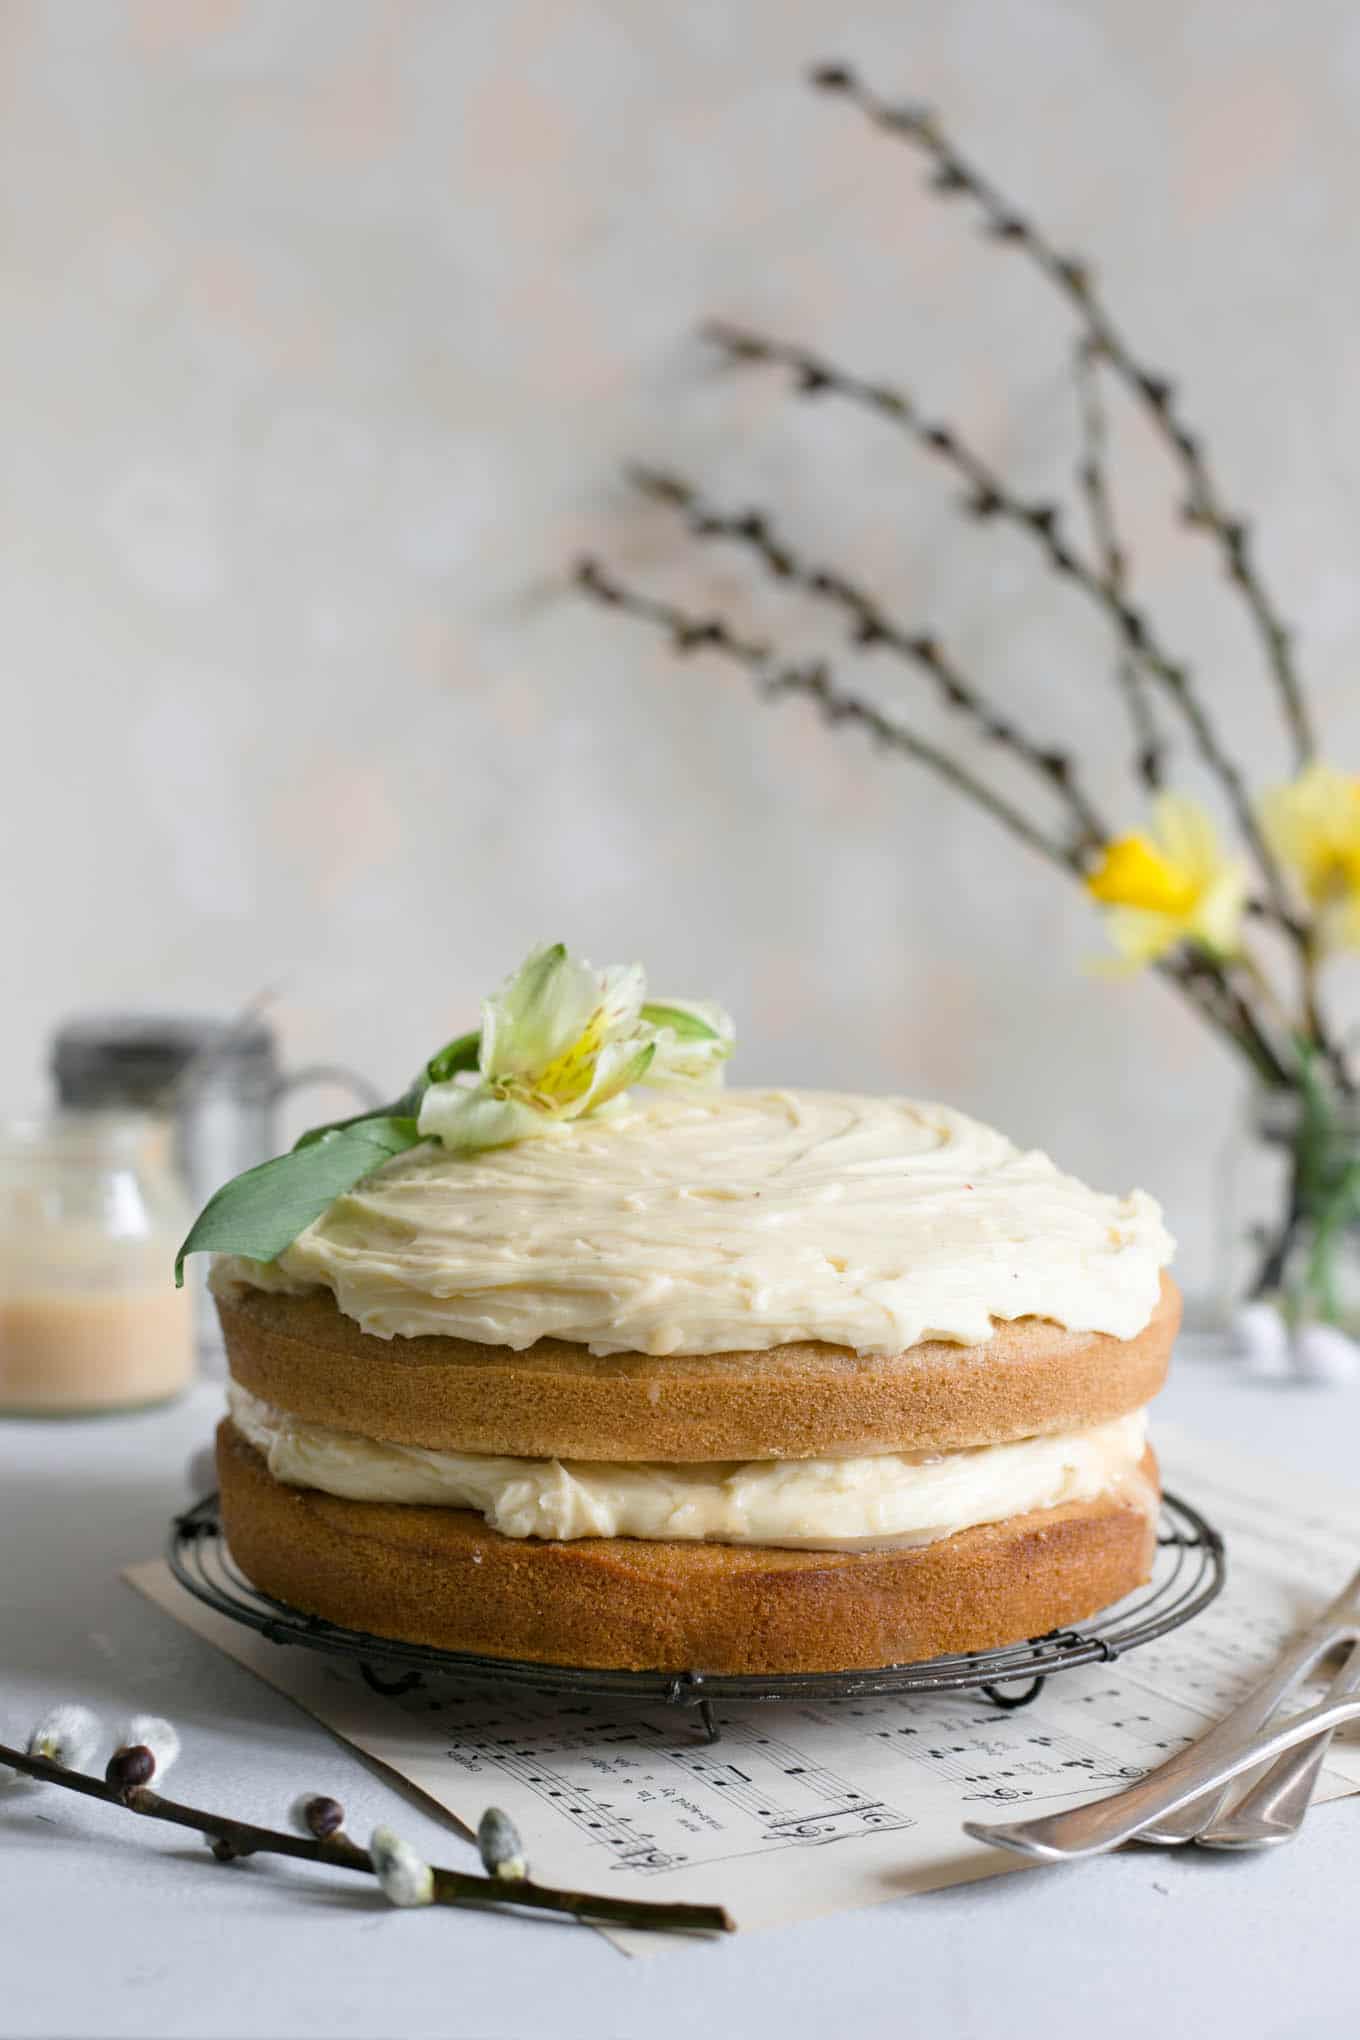 White chocolate and blood orange curd vegan cake, perfect for any occasion! #dairyfree #cake #vegan #foodphotography | via @annabanana.co